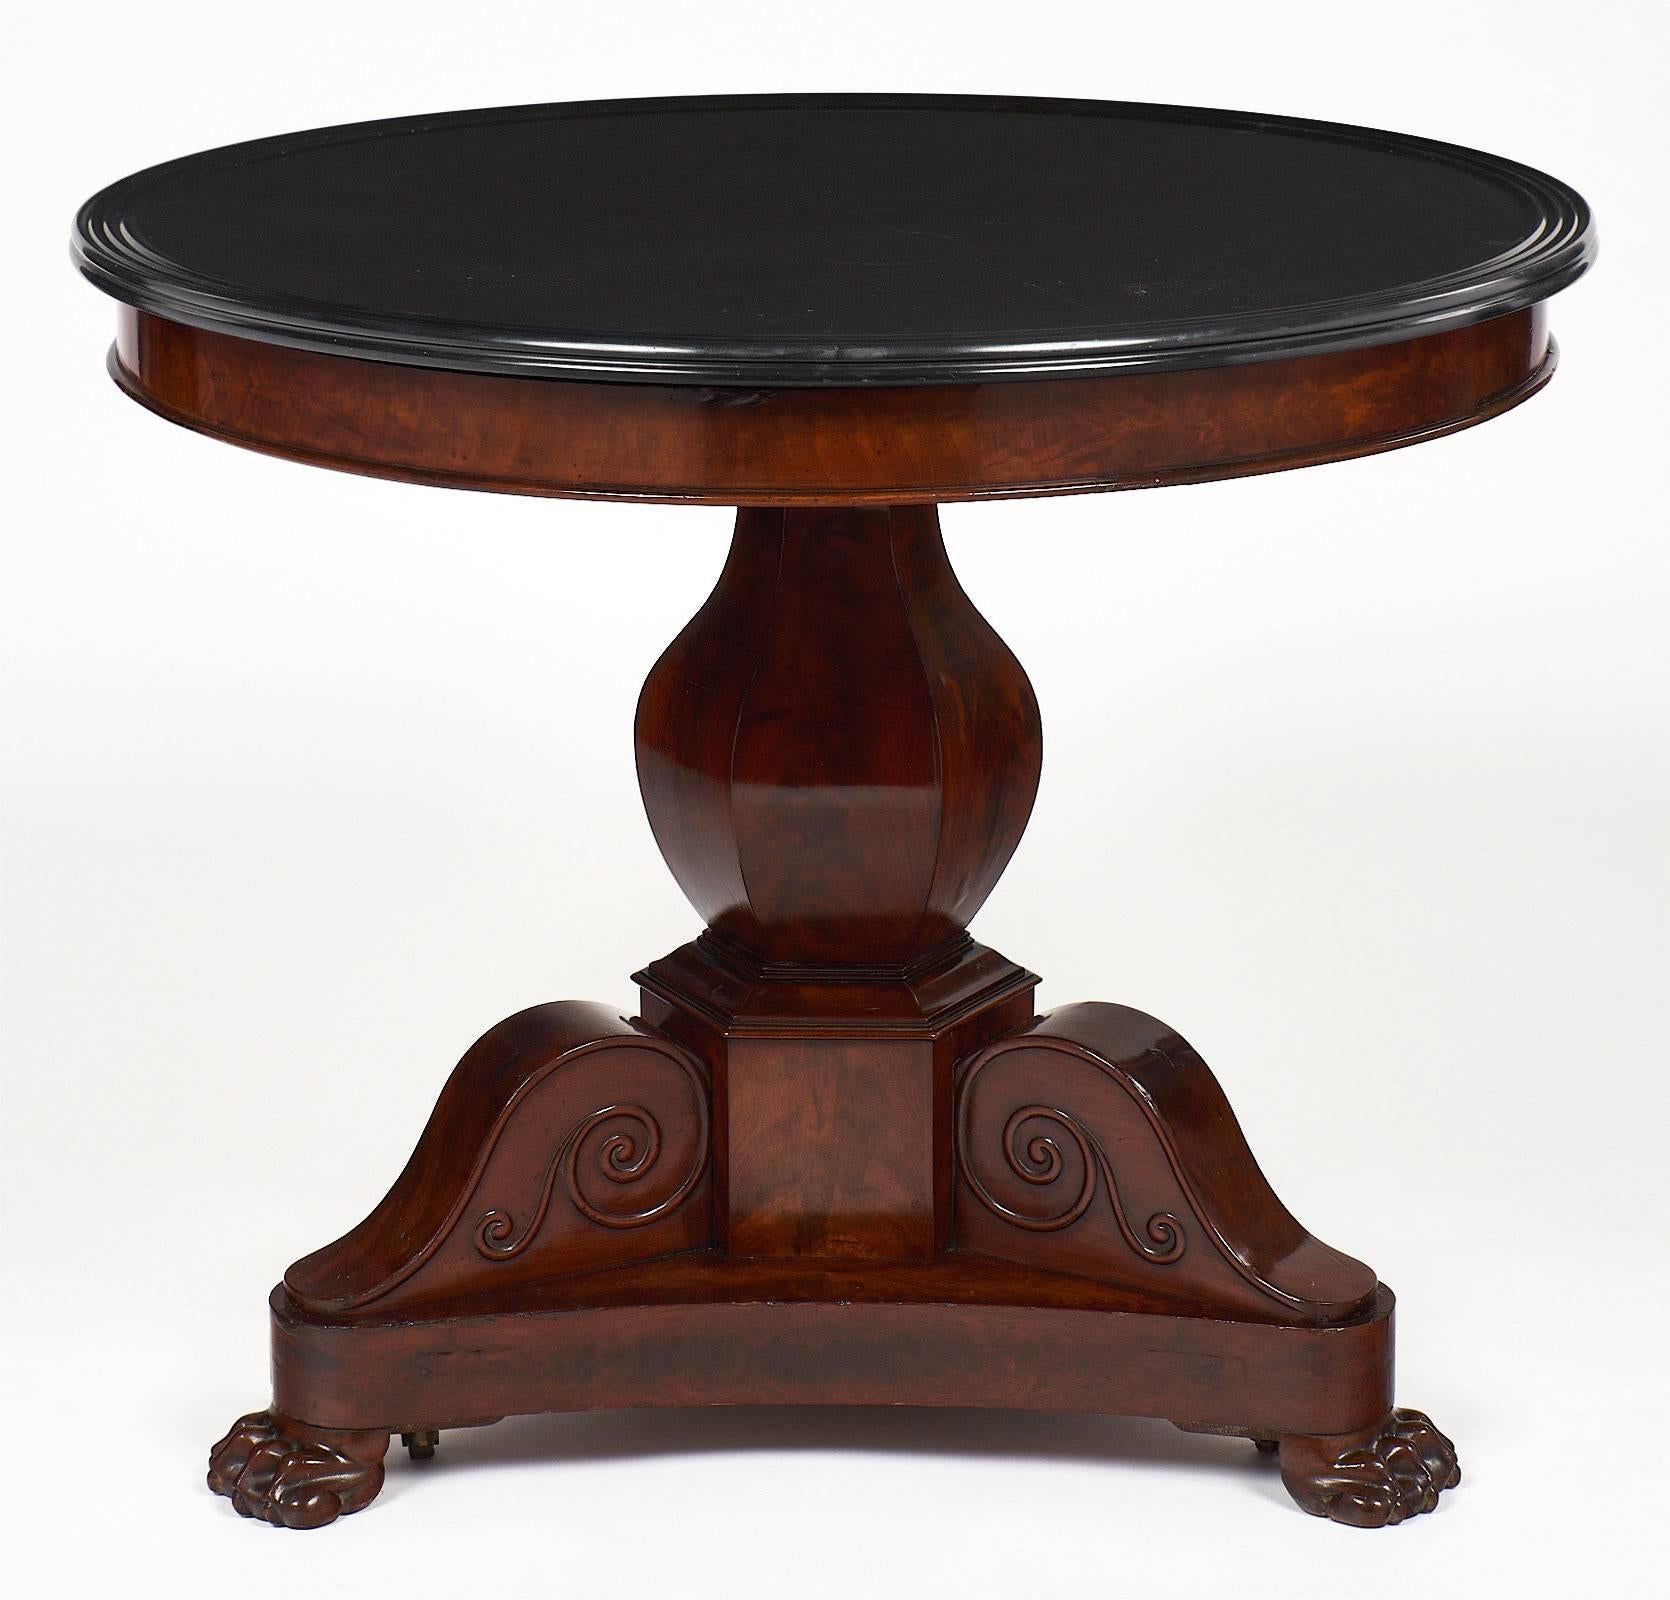 A superb French Empire period mahogany gueridon with a tripod base and claw feet. This piece also has hidden casters. We love the centre tulip column. The table is topped with the original black marble, which is in excellent antique condition.